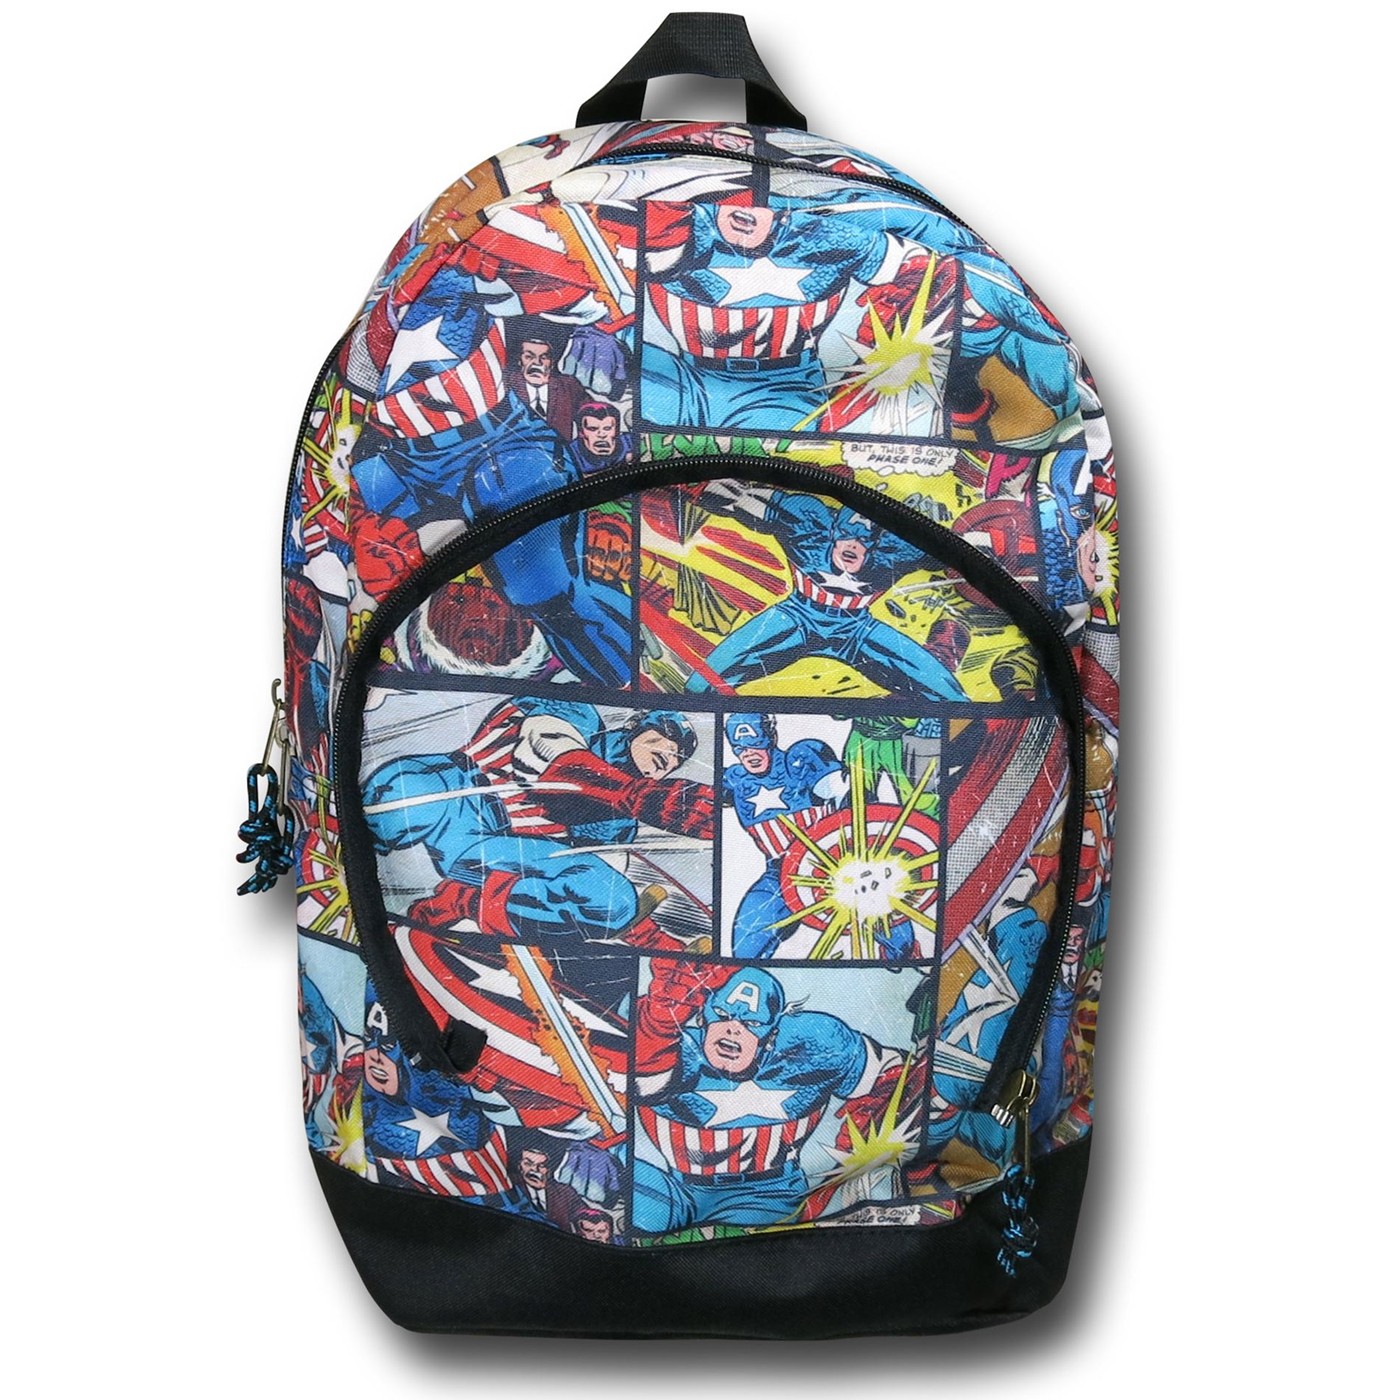 Captain America 3D Shield All-Over Print Backpack